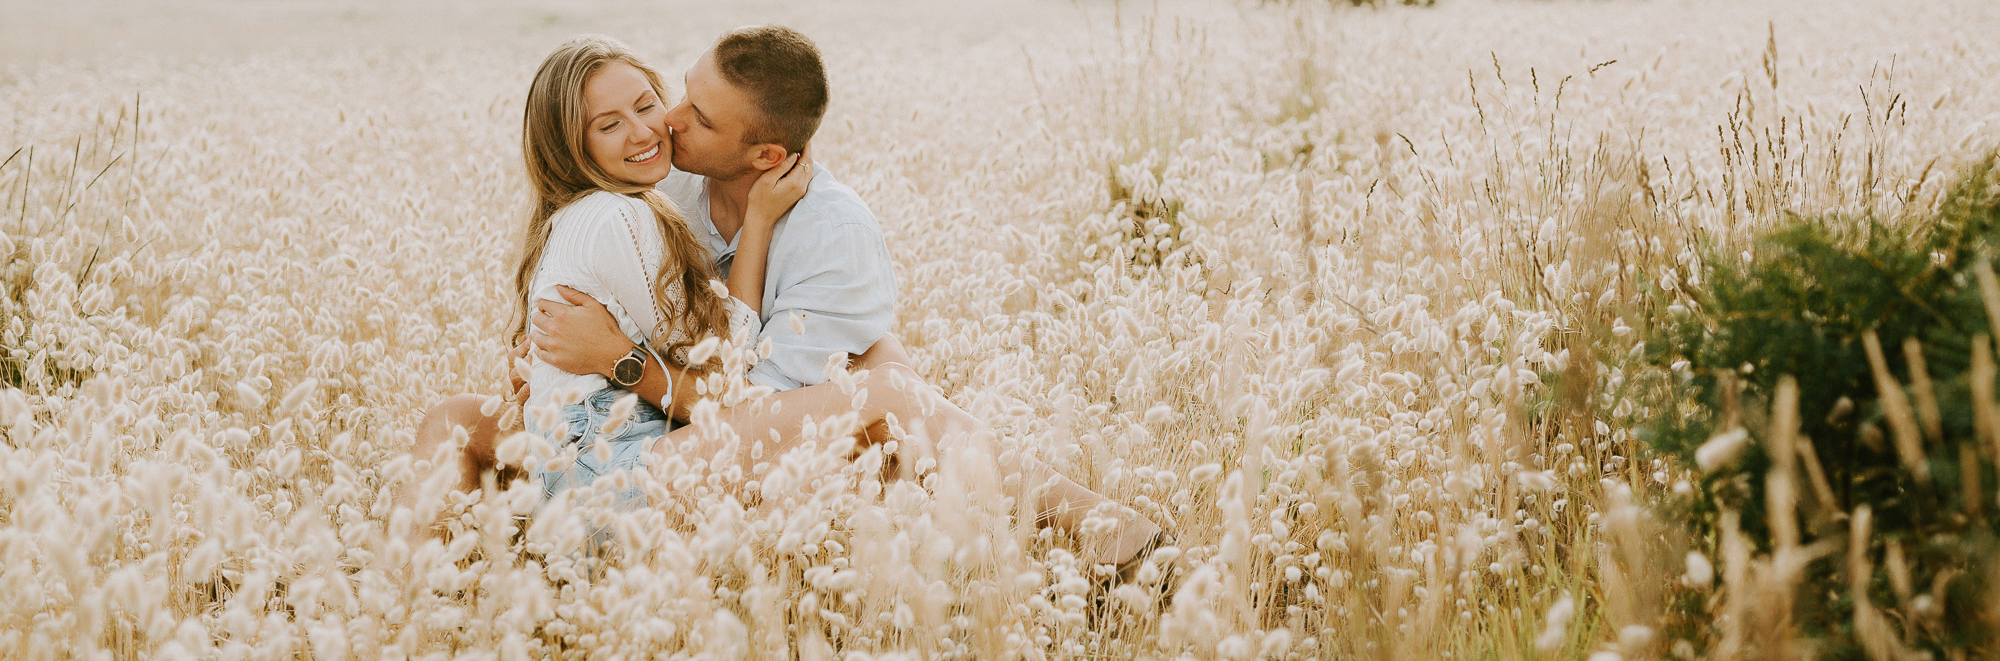 Truly romantic pre-wedding photo-session by Ulla Nordwood